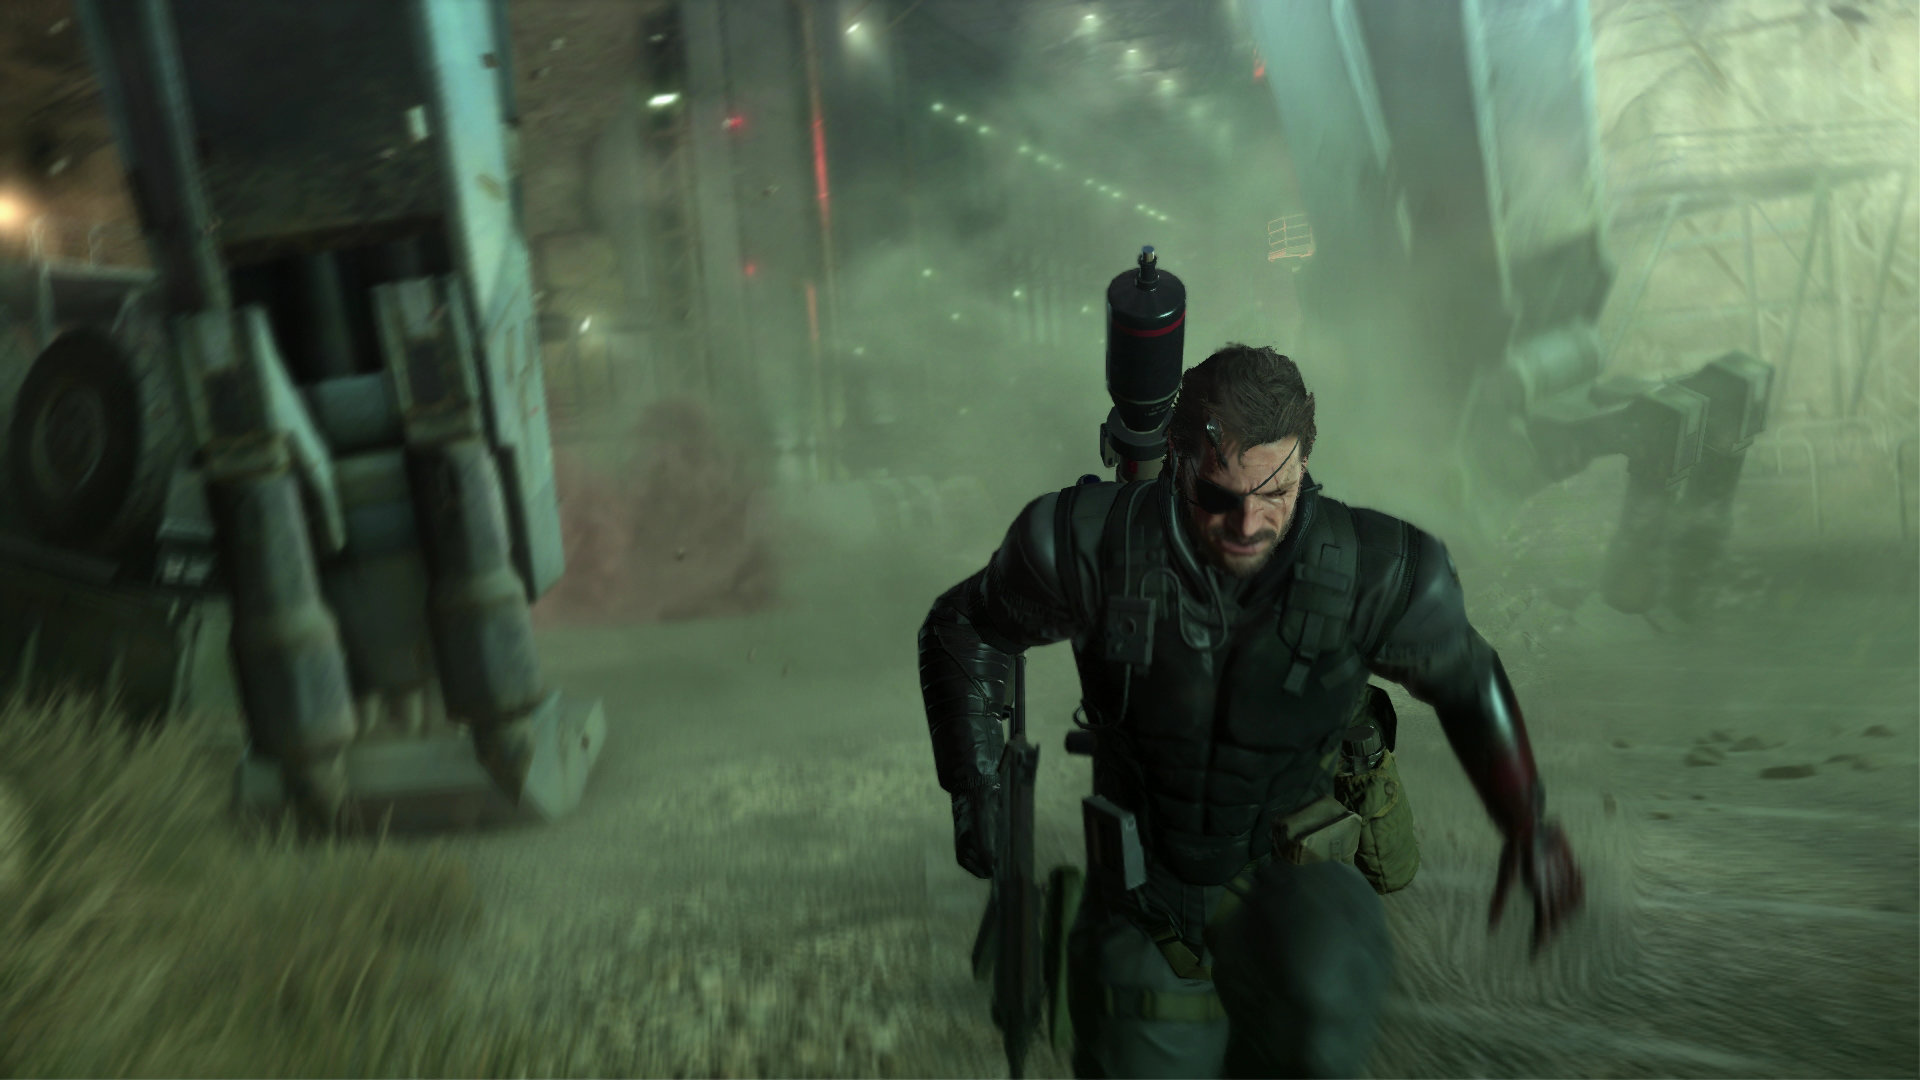 Metal gear solid v the phantom pain pc download game